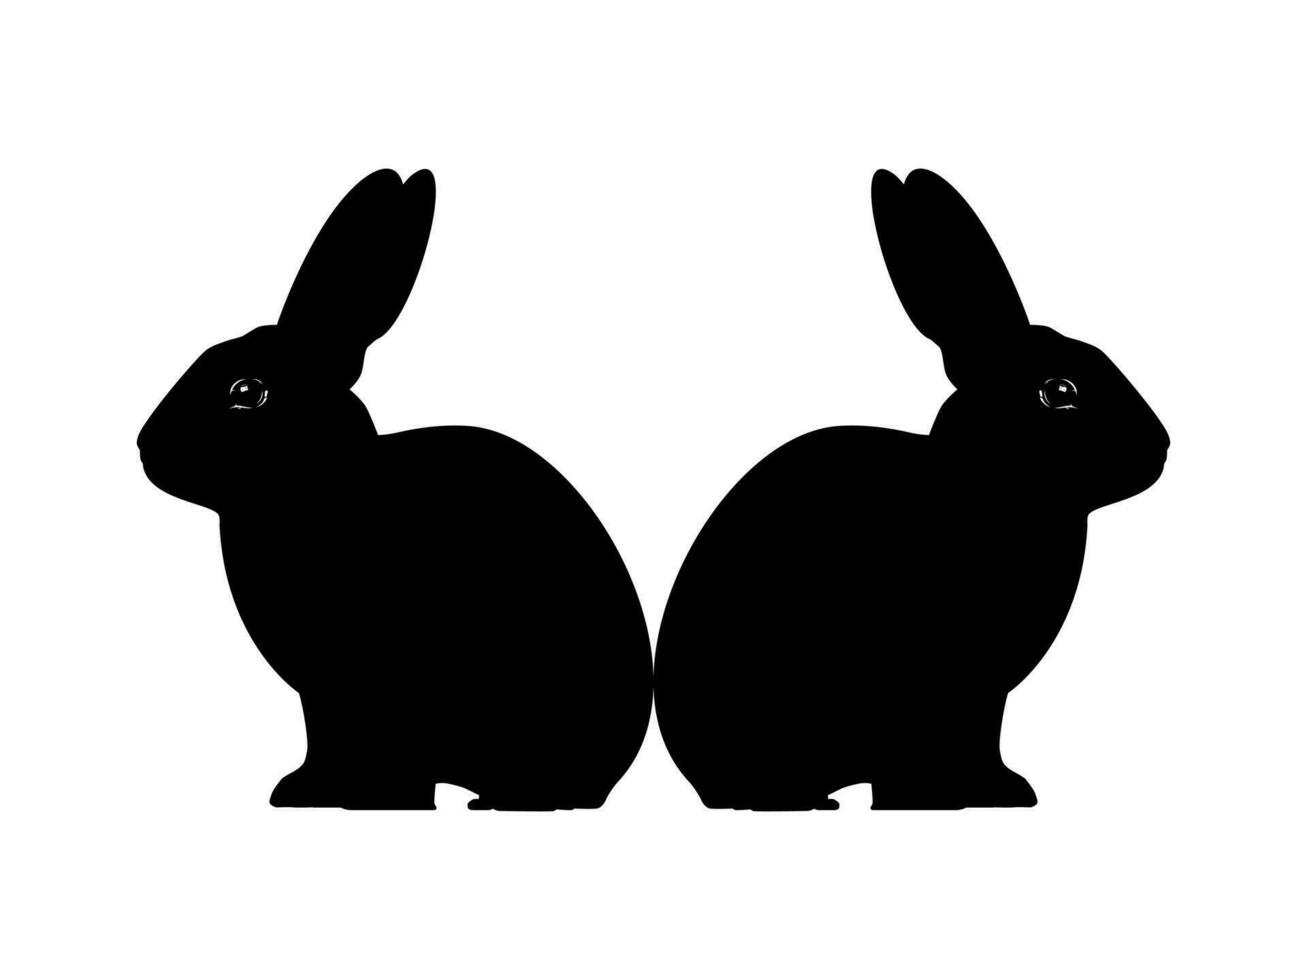 Pair of the Rabbit or Bunny or Hare Silhouette for Art Illustration, Logo Type, Pictogram, Apps, Website or Graphic Design Element. Vector Illustration